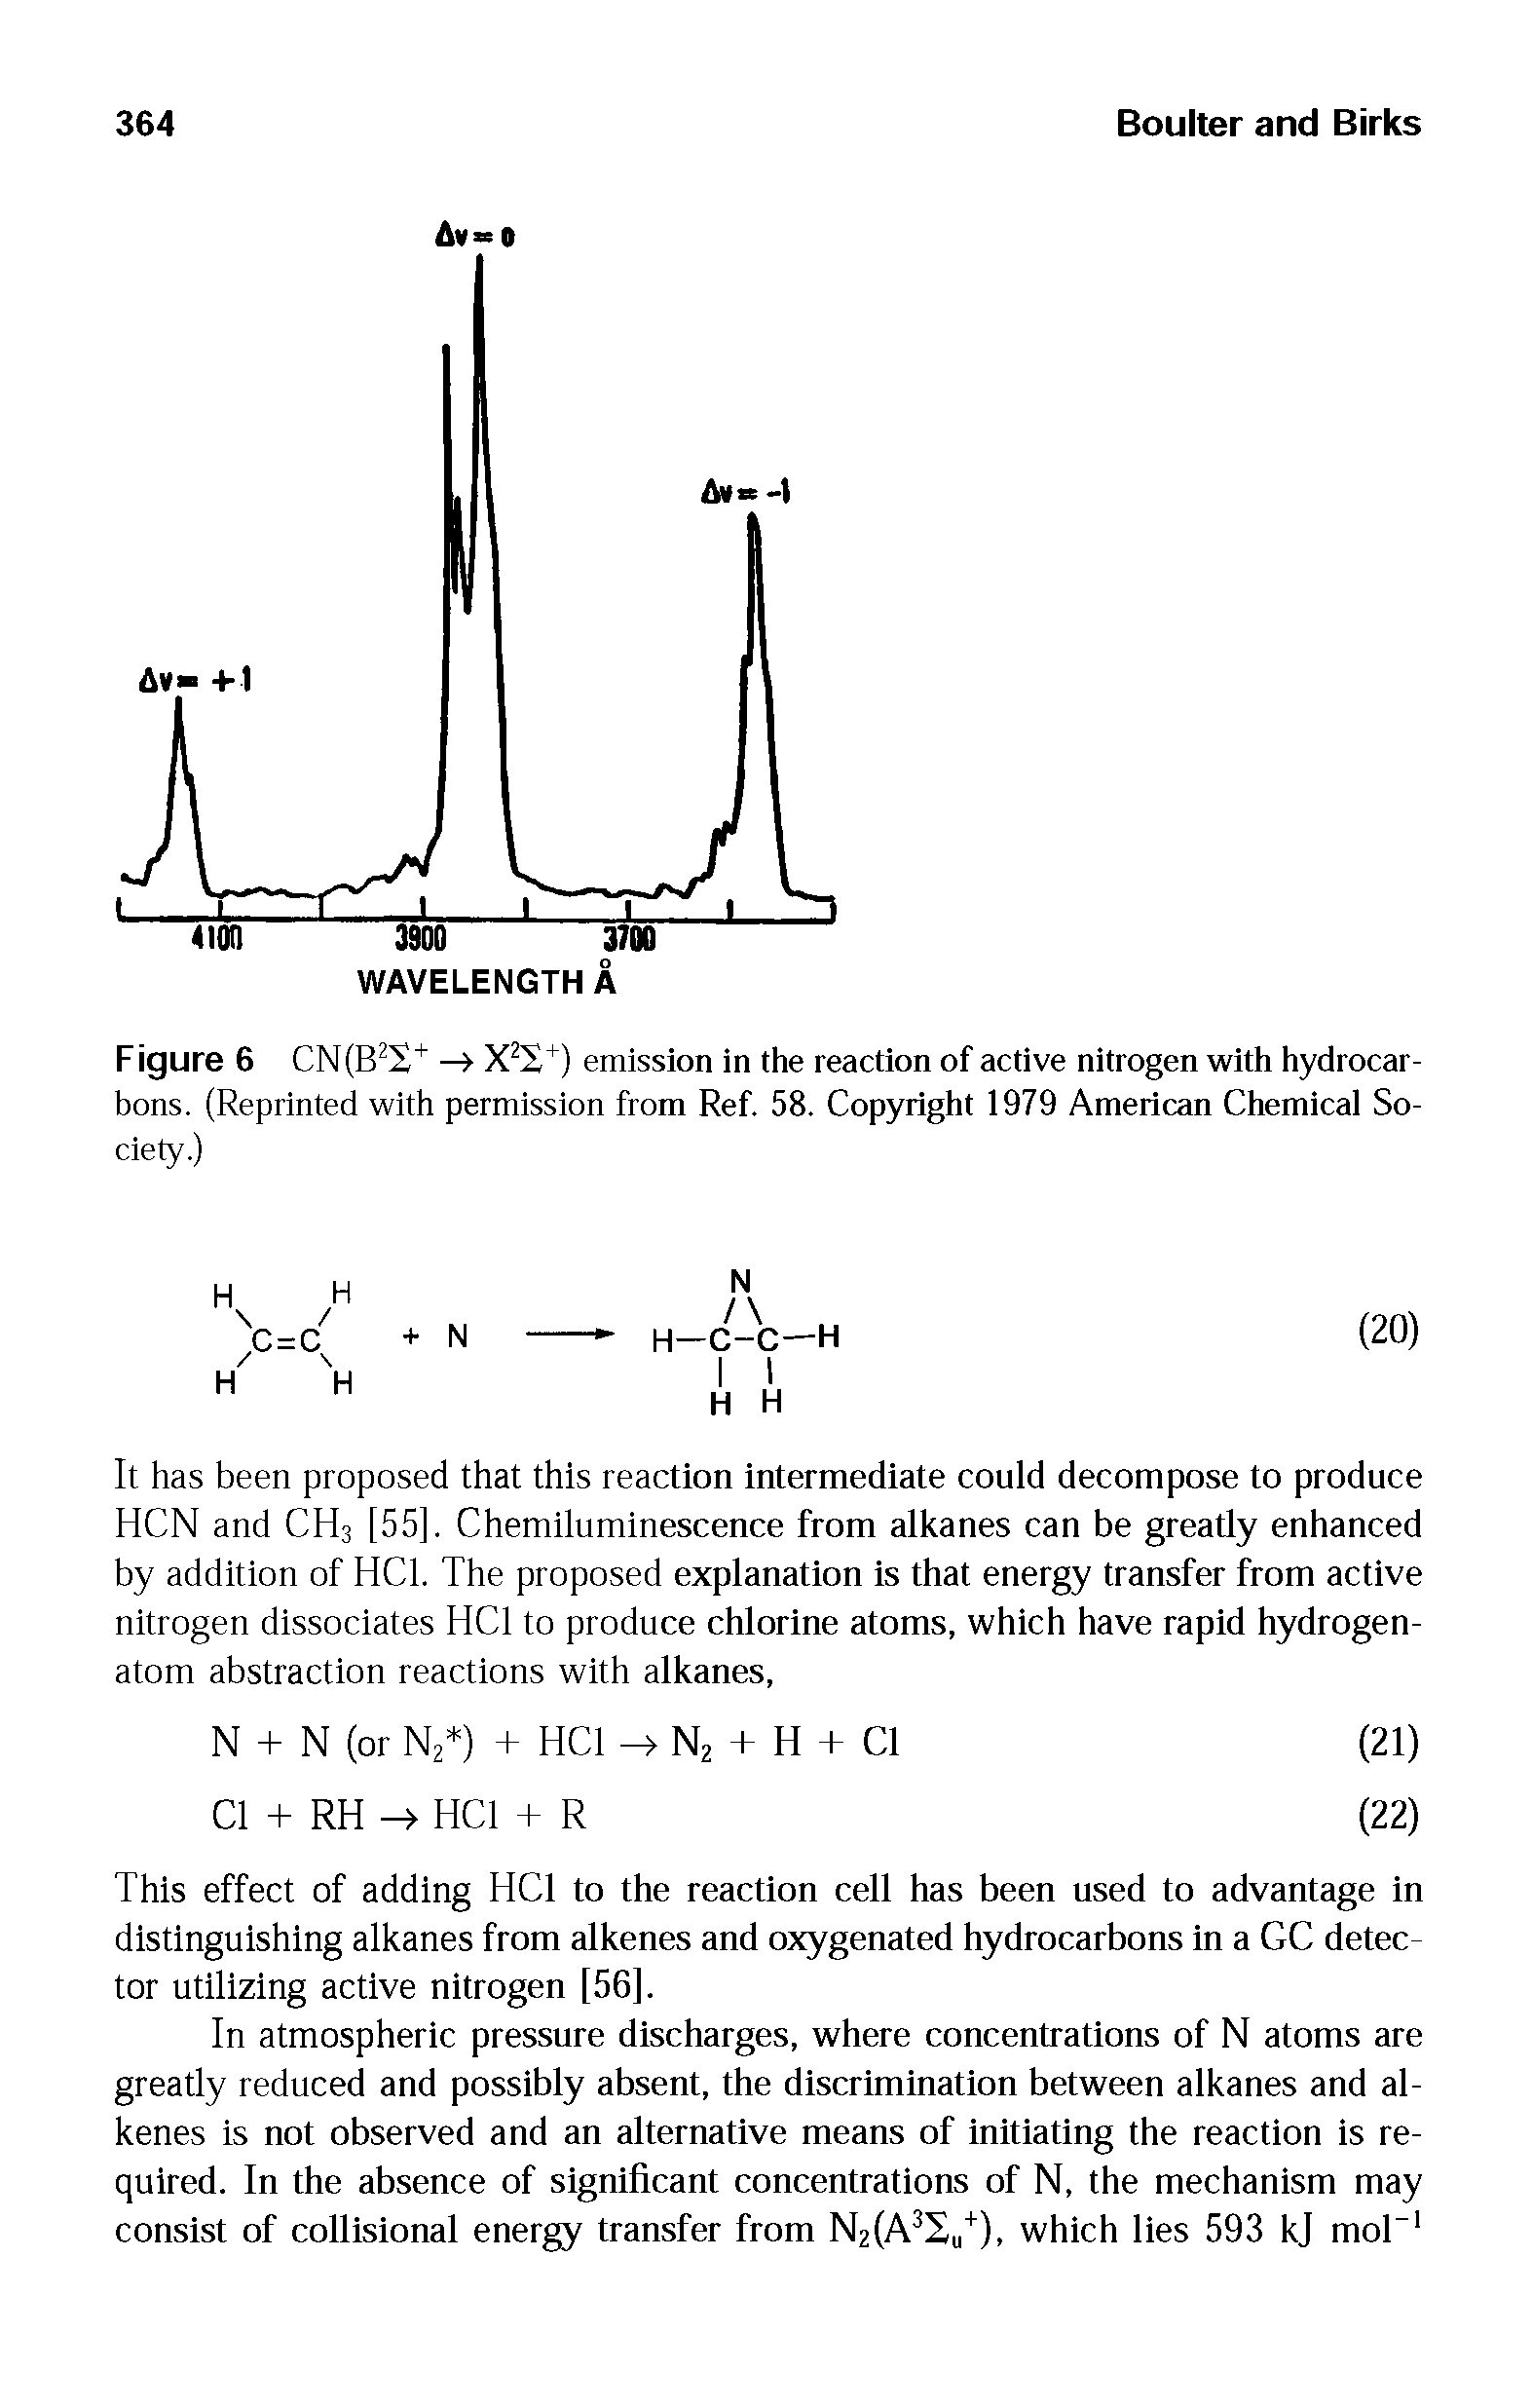 Figure 6 CN(B2X+ —> X2T ) emission in the reaction of active nitrogen with hydrocarbons. (Reprinted with permission from Ref. 58. Copyright 1979 American Chemical Society.)...